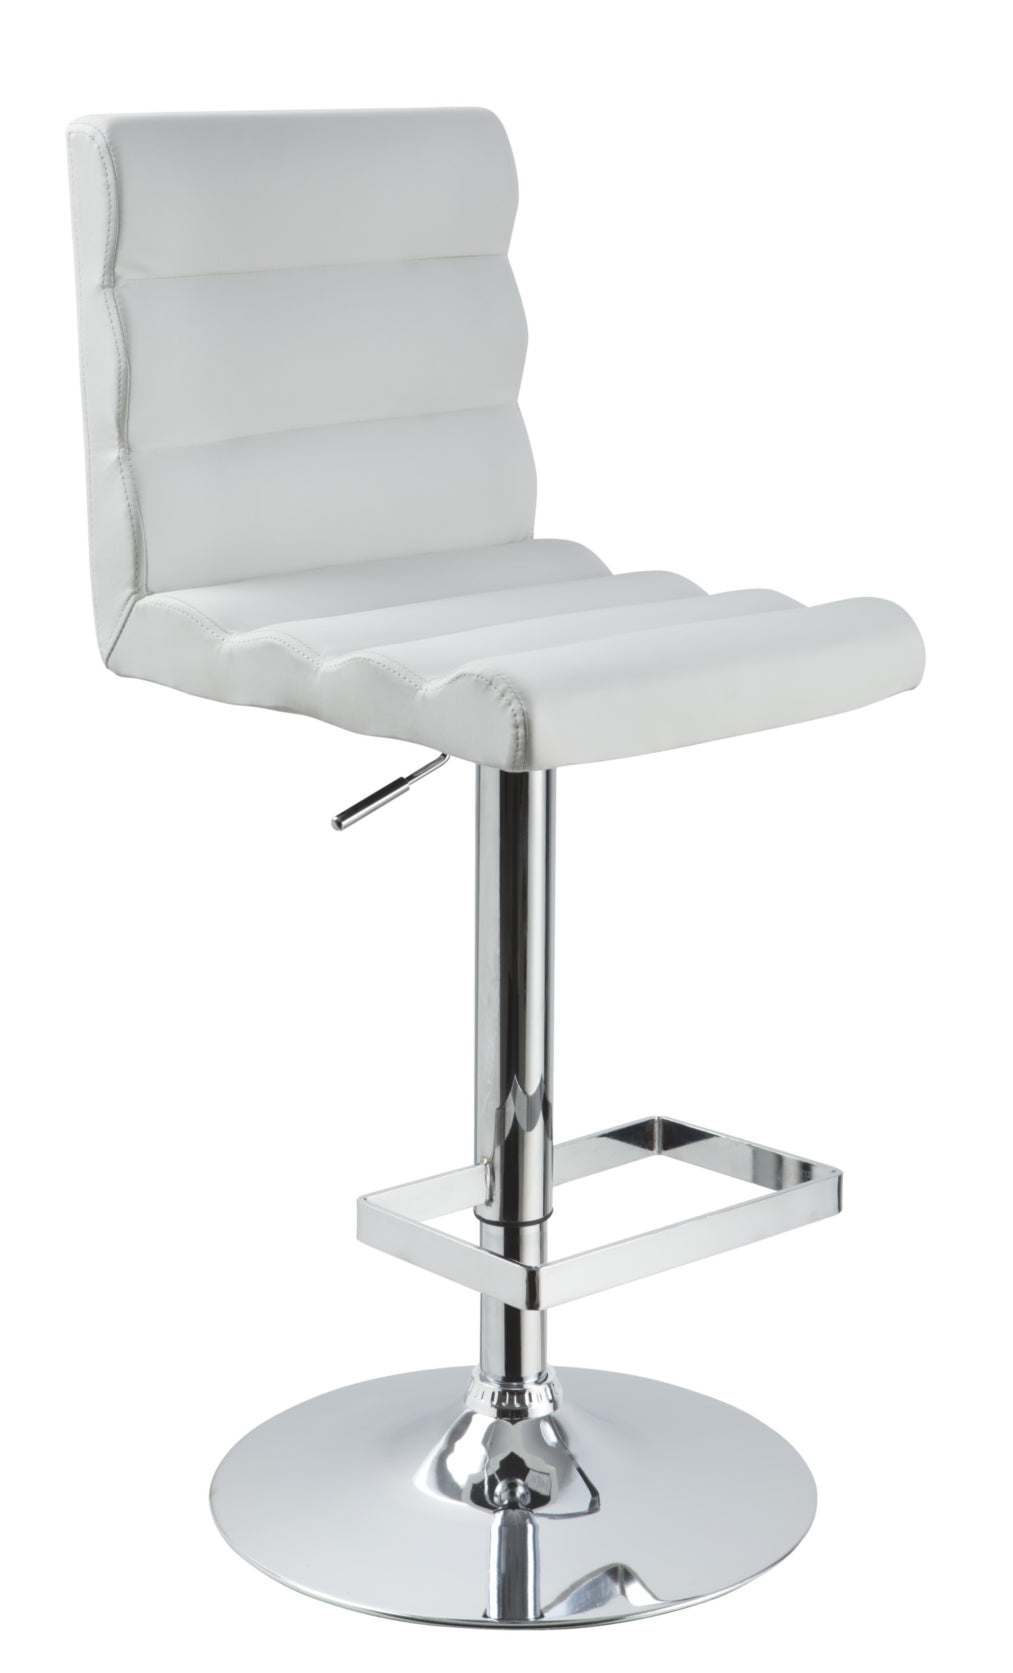 Modrest T1066 - Eco-Leather Contemporary Barstool